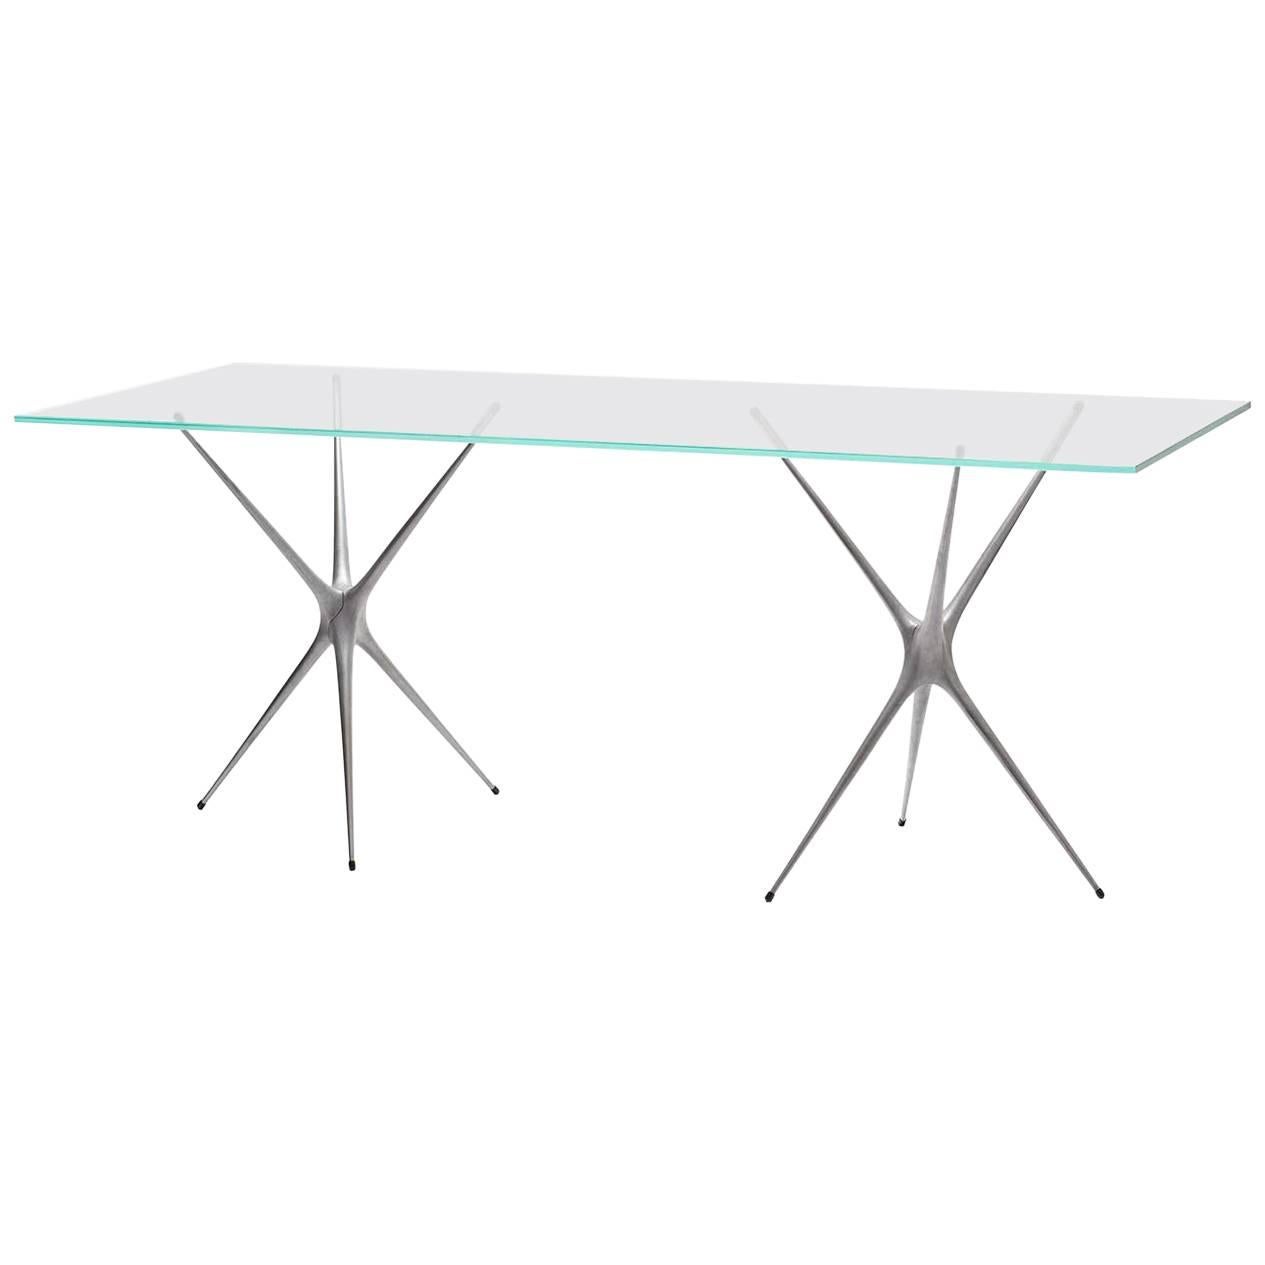 Supernova, Recycled Cast Aluminum Trestle Table Legs & Glass by Made in Ratio